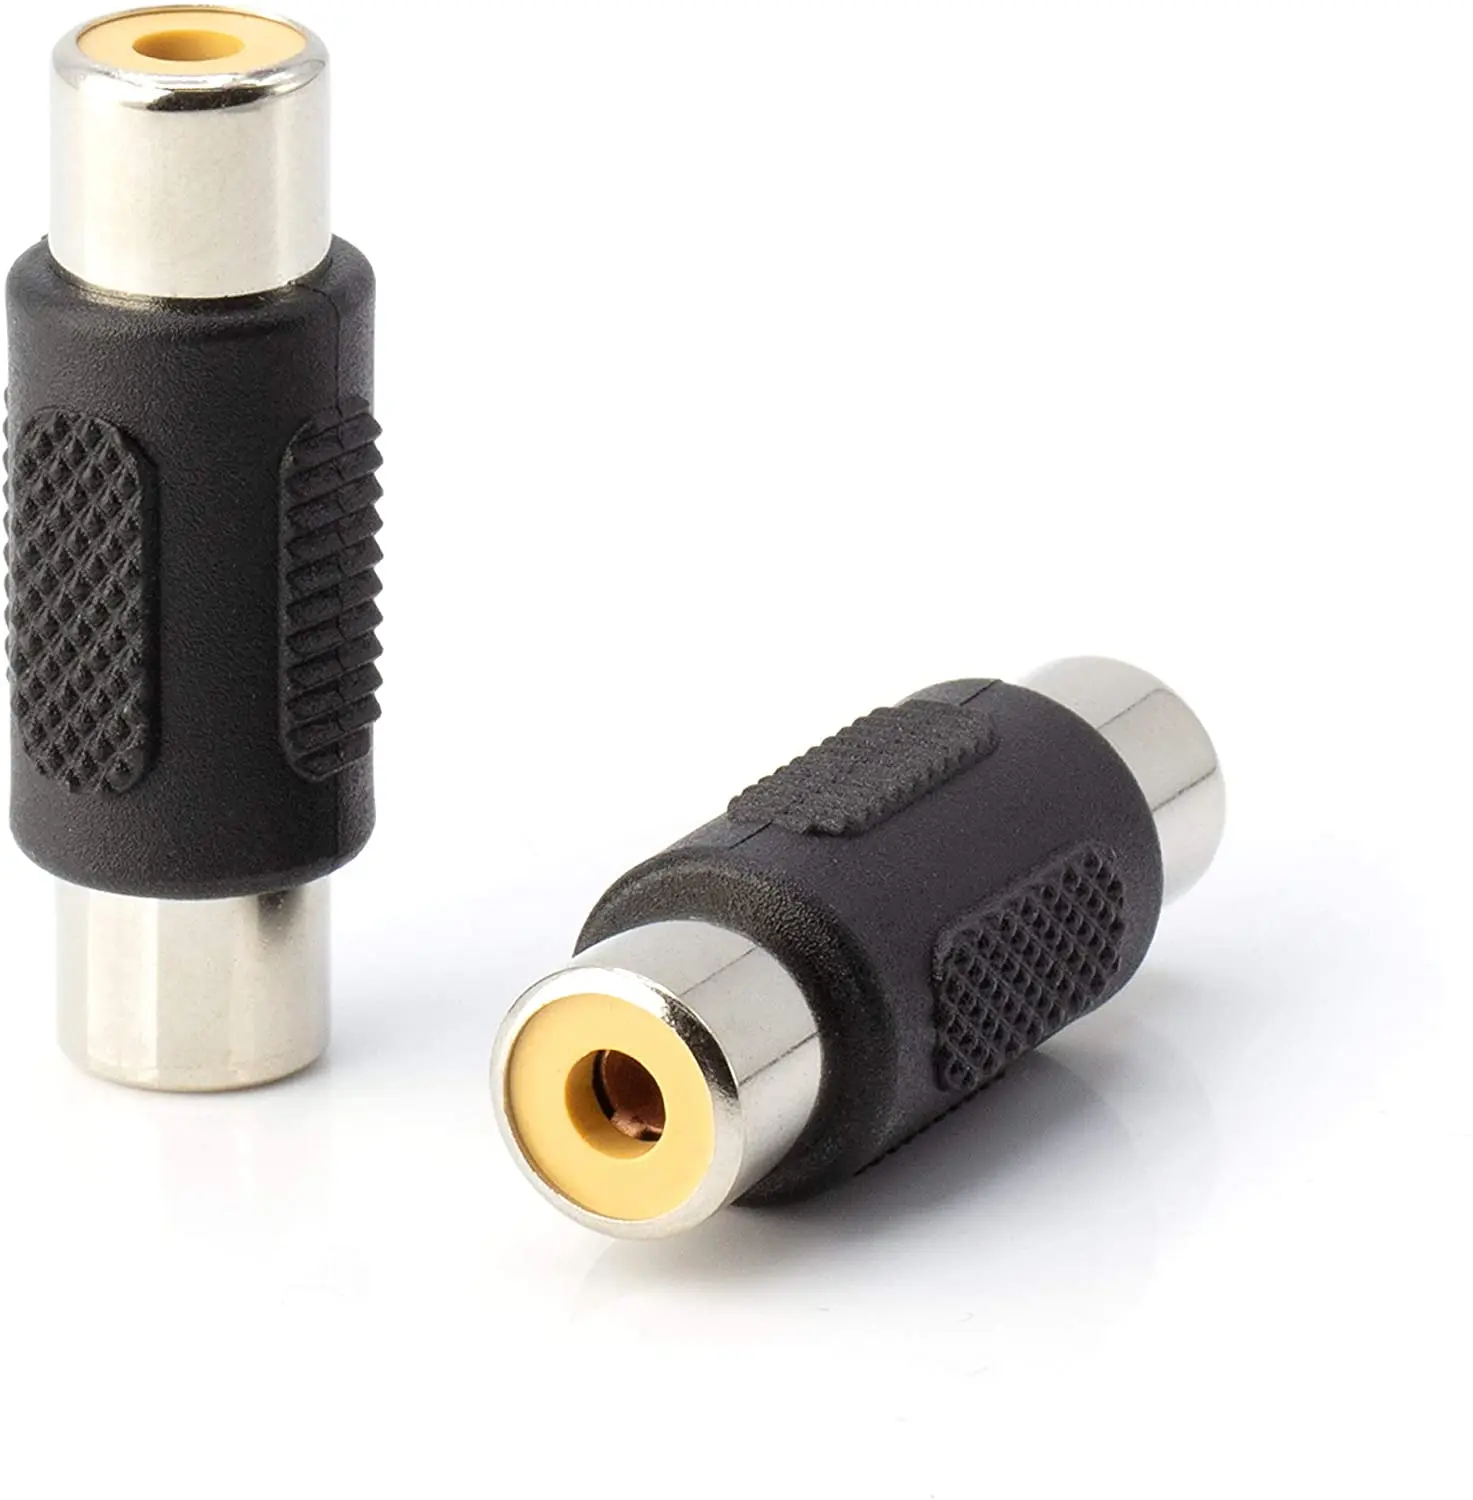 2pcs Gold Plated Brass RCA Phono Coupler Female to Female Audio Video Adapter 